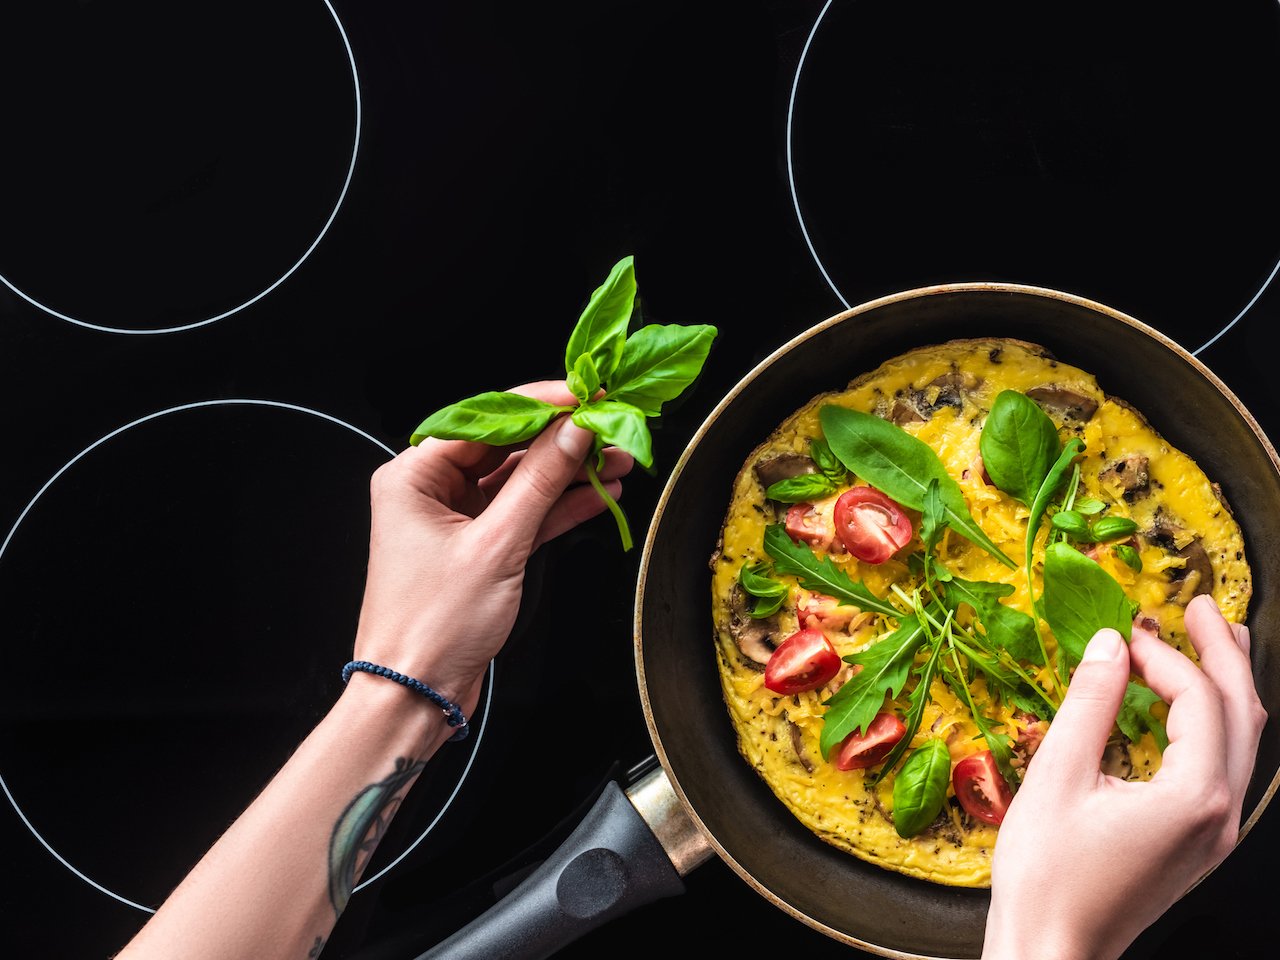 https://chatelaine.com/wp-content/uploads/2019/07/induction-cooktops.jpg